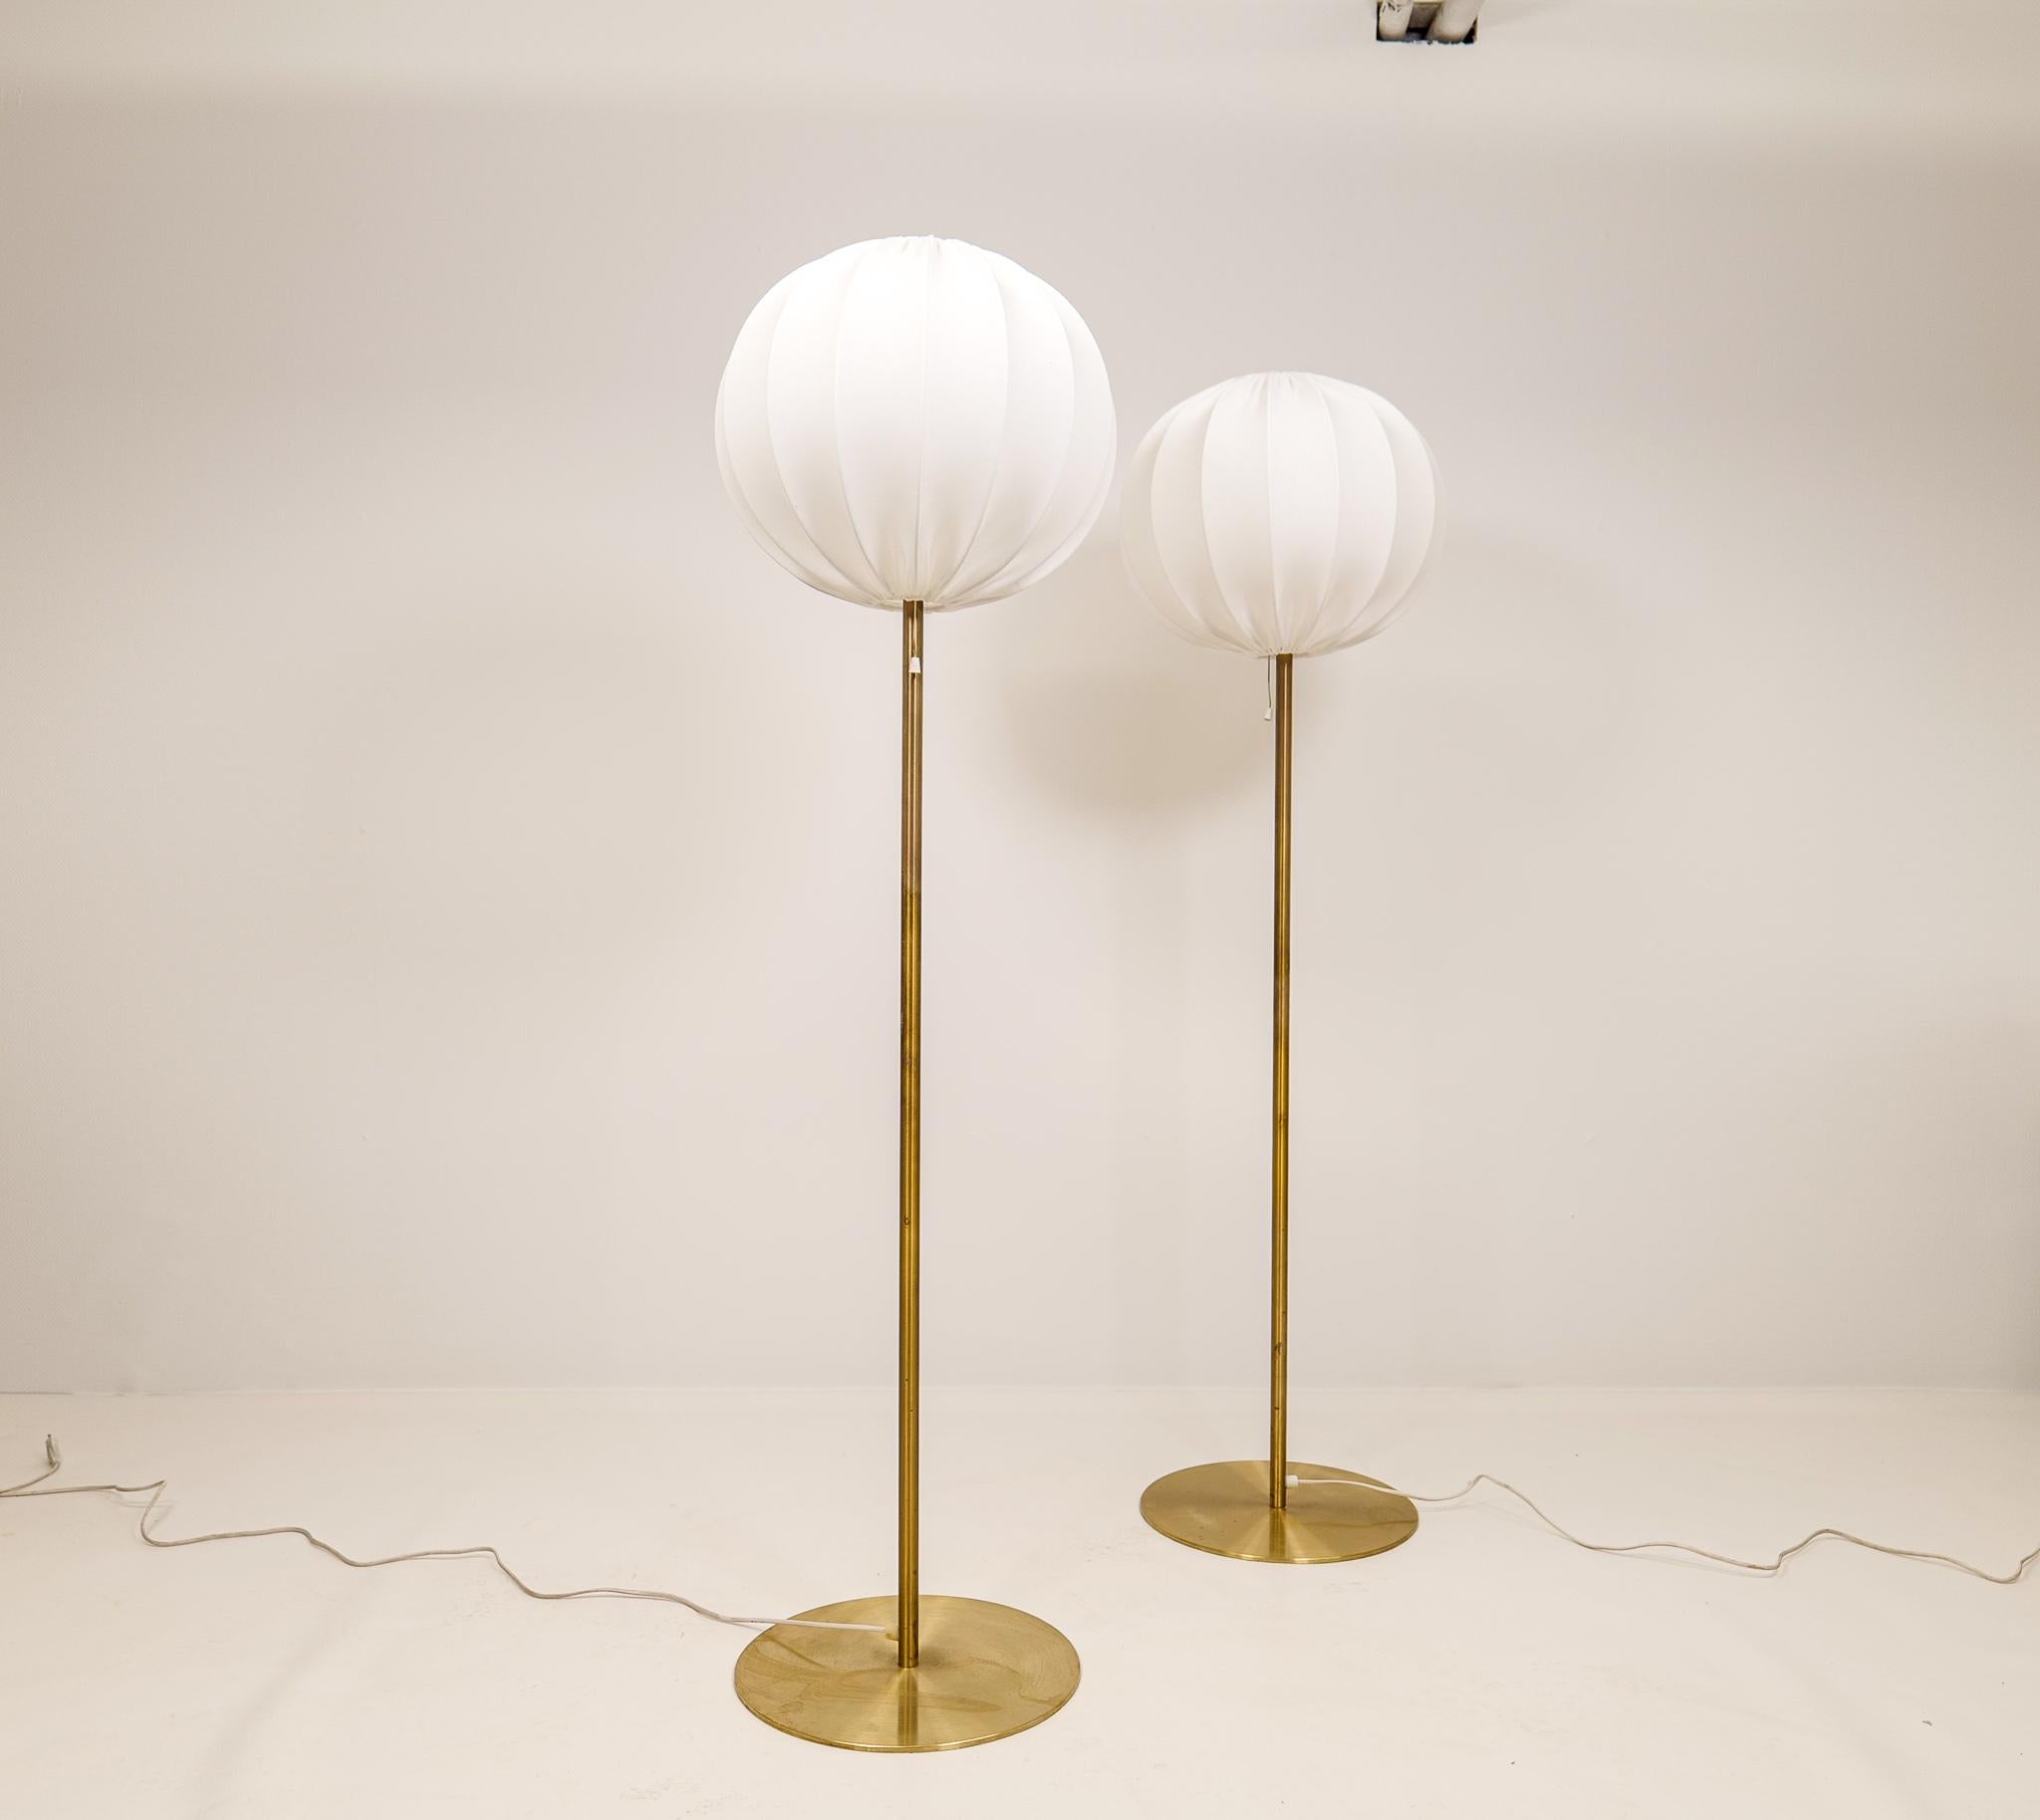 Late 20th Century Mid-Century Modern Pair of Brass Floor Lamps Luxus, Sweden, 1970s For Sale